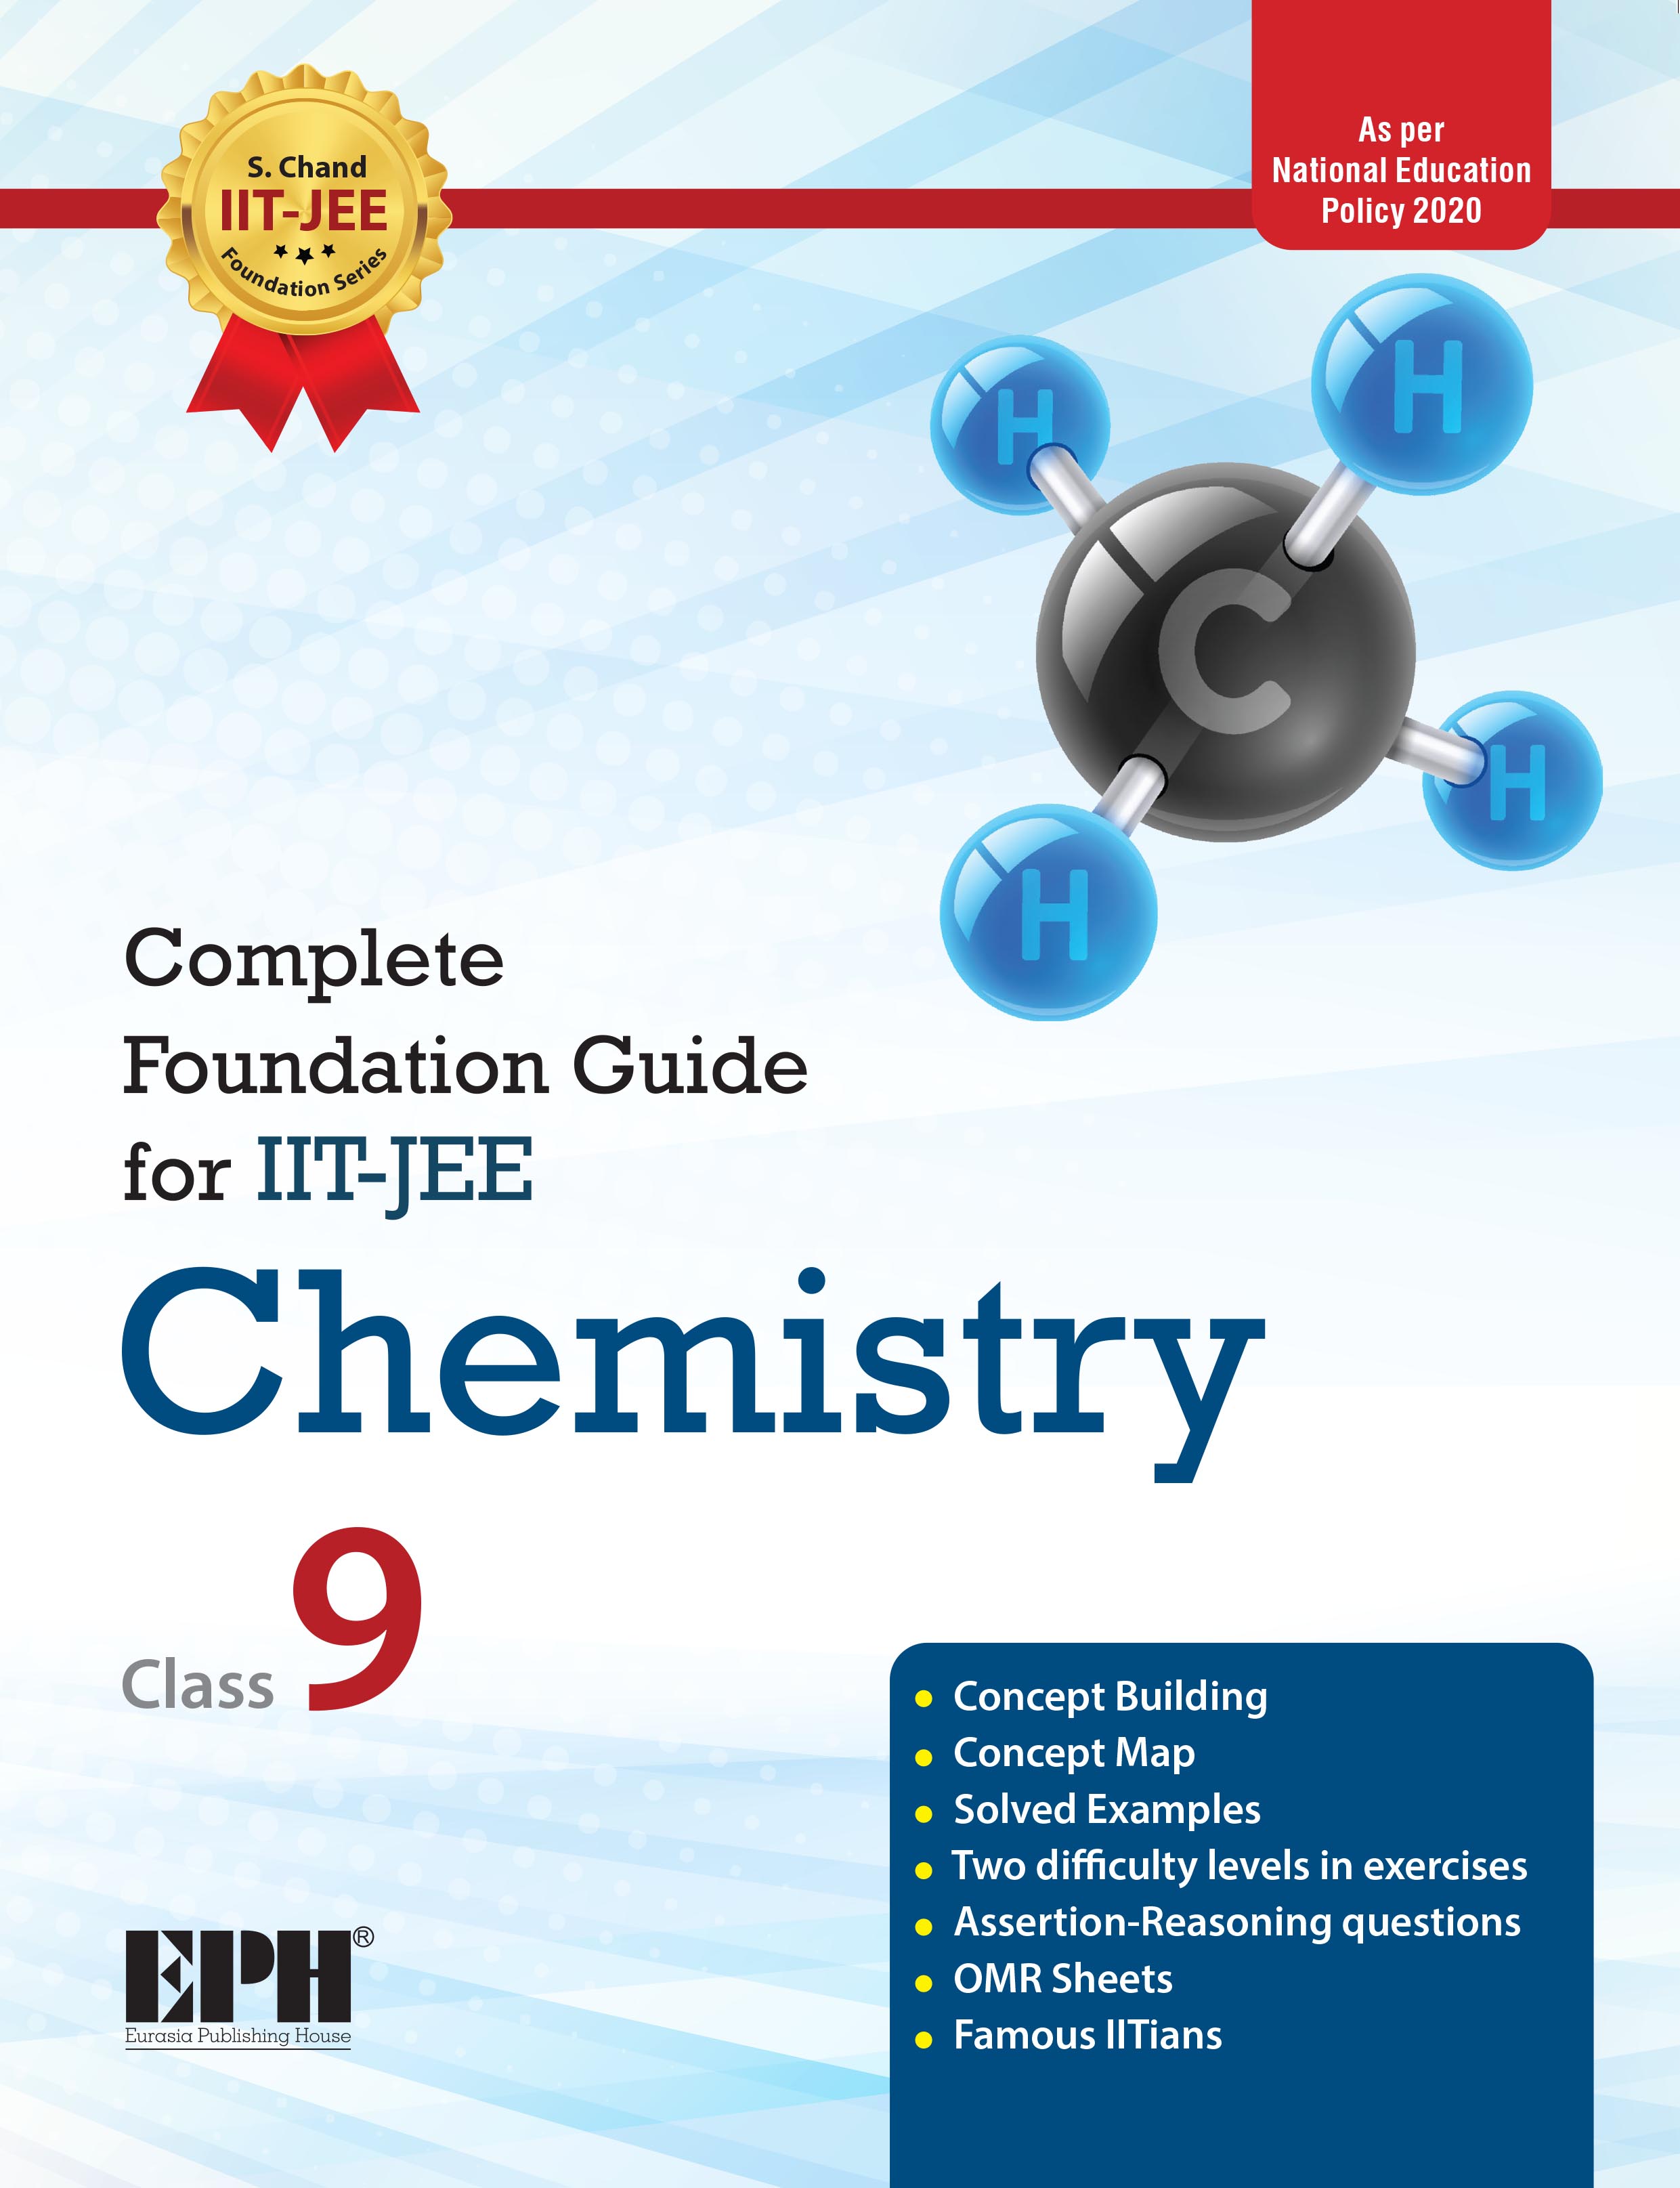 Complete Foundation Guide for IIT-JEE Chemistry Class 9